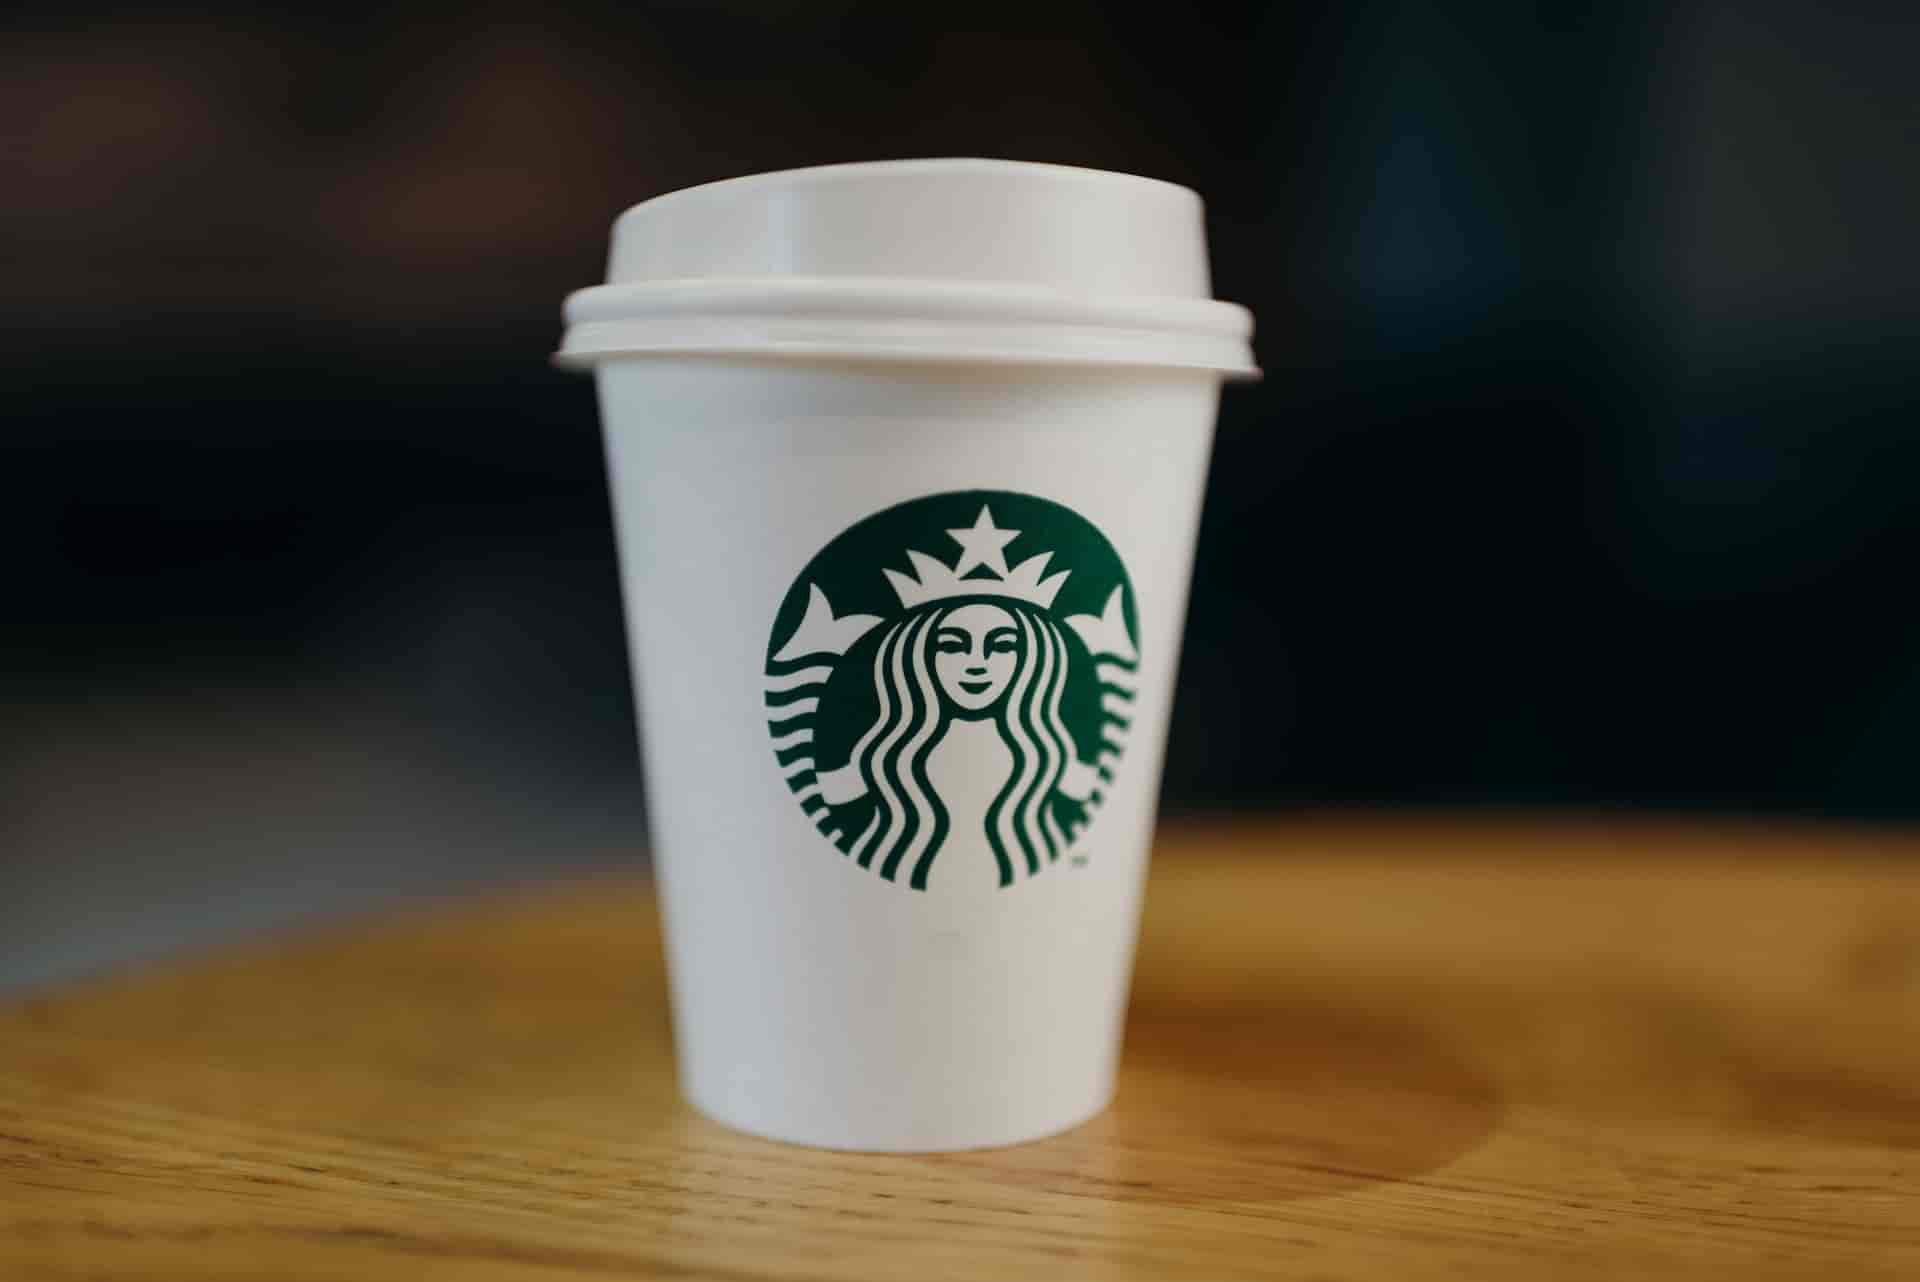 17 Starbucks Drinks With The Most Caffeine